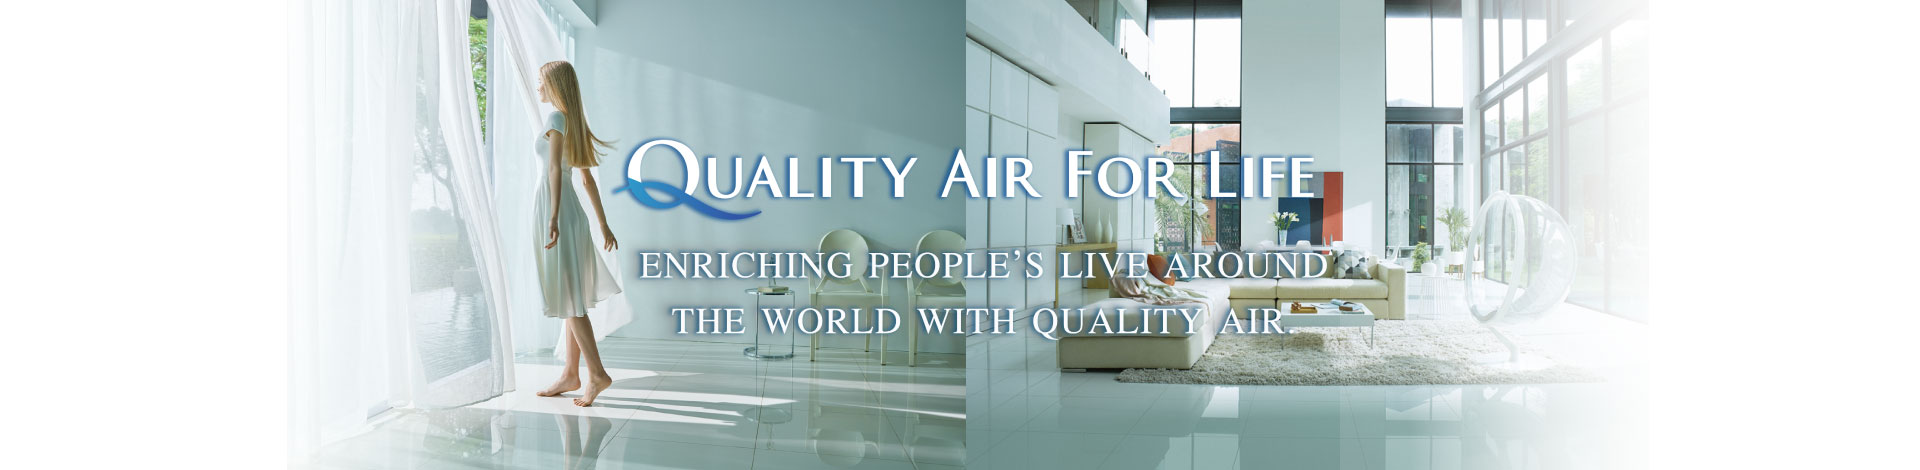 Quality Air for Life